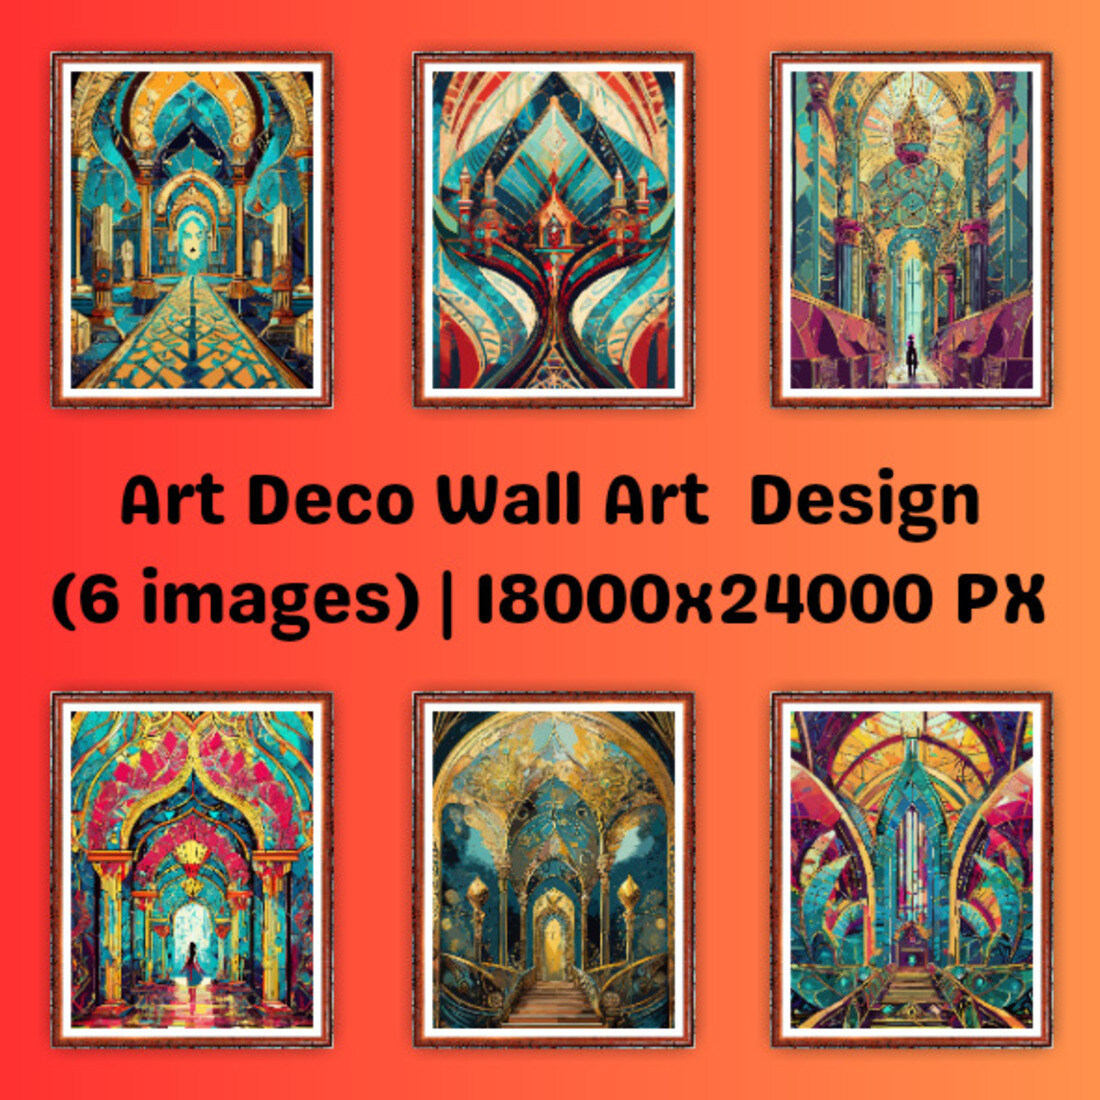 Elegance Redefined: Art Deco Wall Art Collection cover image.